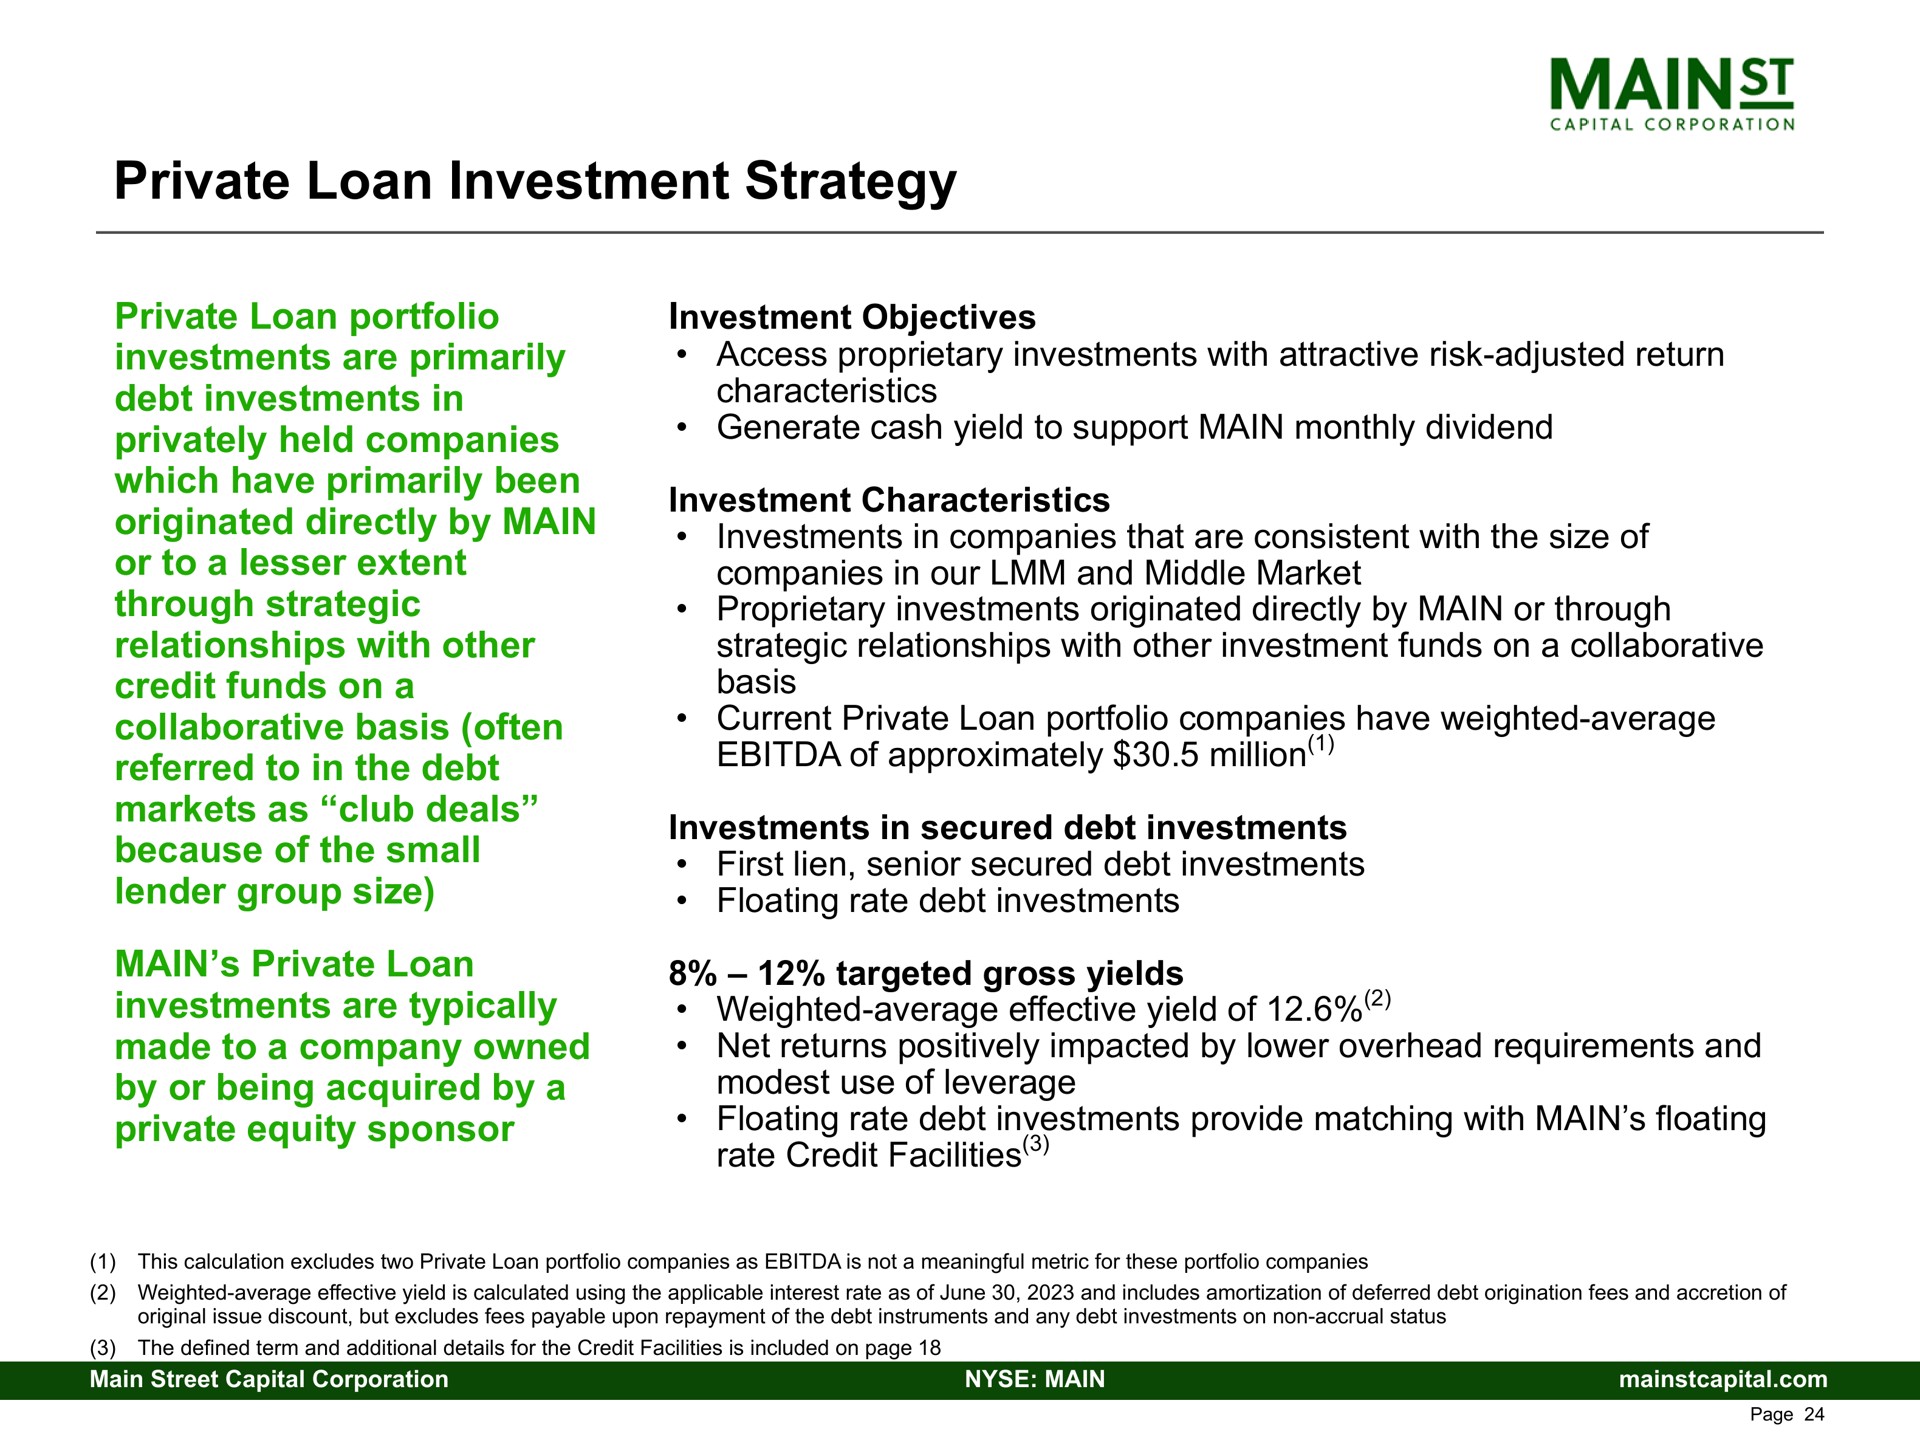 private loan investment strategy private loan portfolio investments are primarily debt investments in privately held companies which have primarily been originated directly by main or to a lesser extent through strategic relationships with other credit funds on a collaborative basis often referred to in the debt markets as club deals because of the small lender group size main private loan investments are typically made to a company owned by or being acquired by a private equity sponsor characteristics our and middle market approximately million weighted average effective yield | Main Street Capital